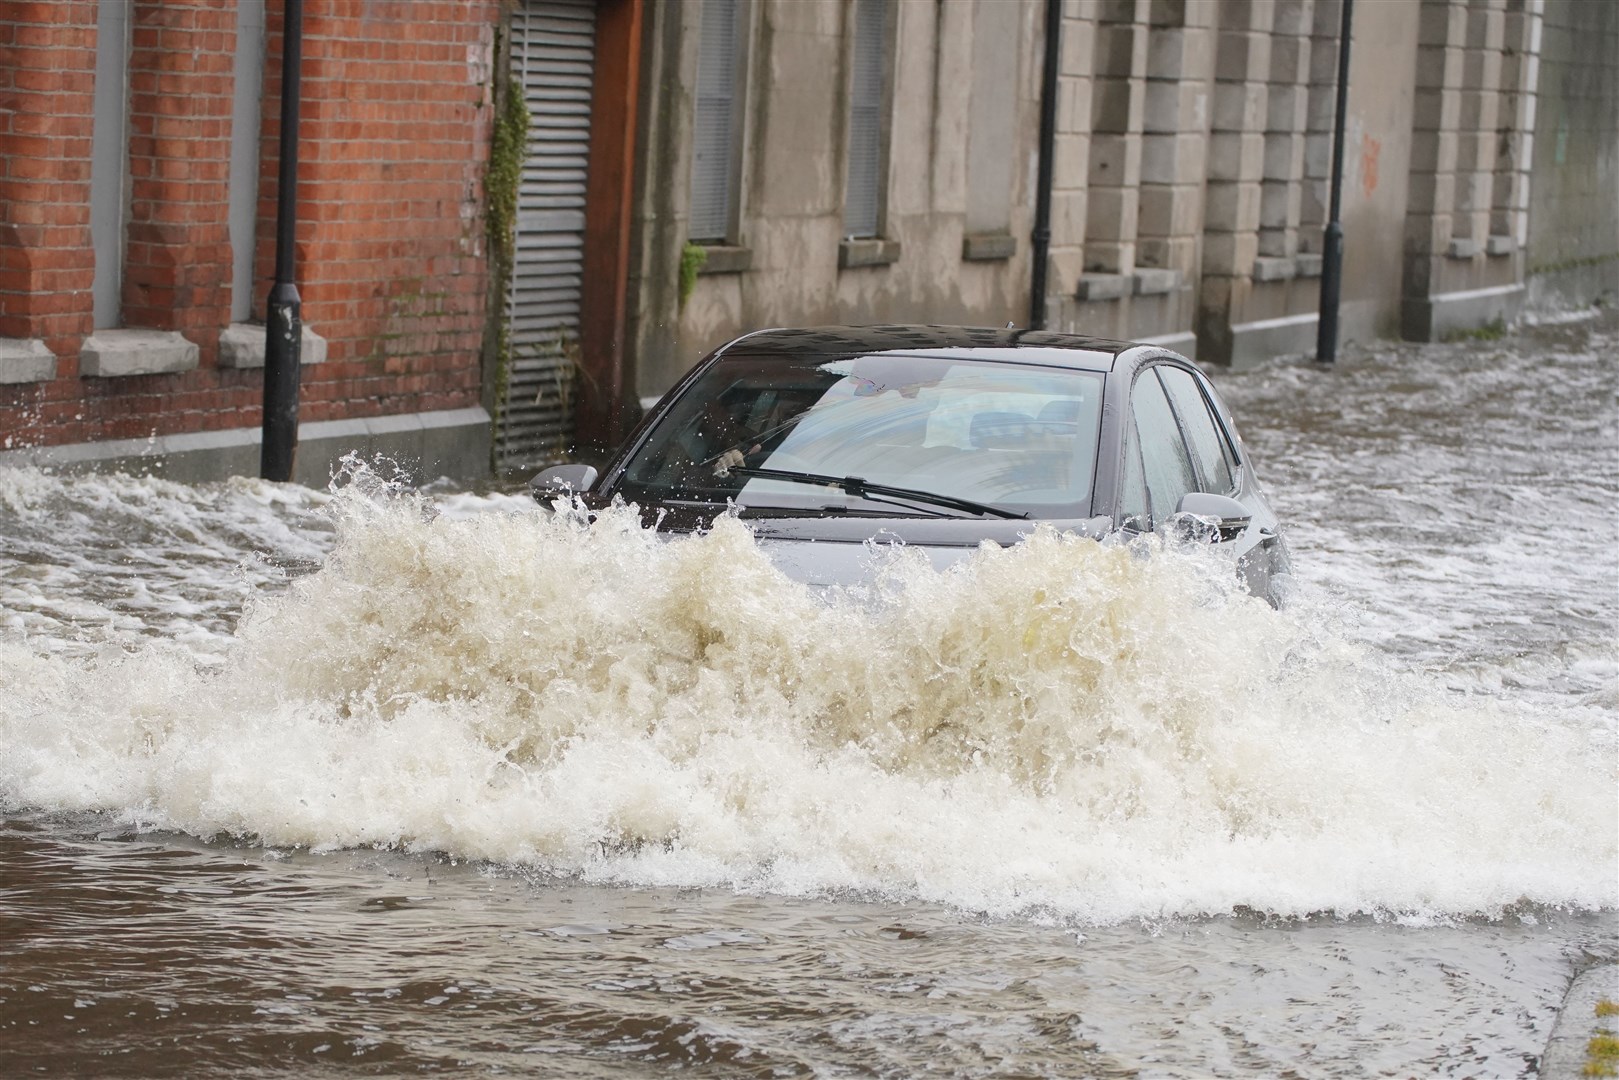 Newry Town has been swamped by floodwater (Brian Lawless/PA)